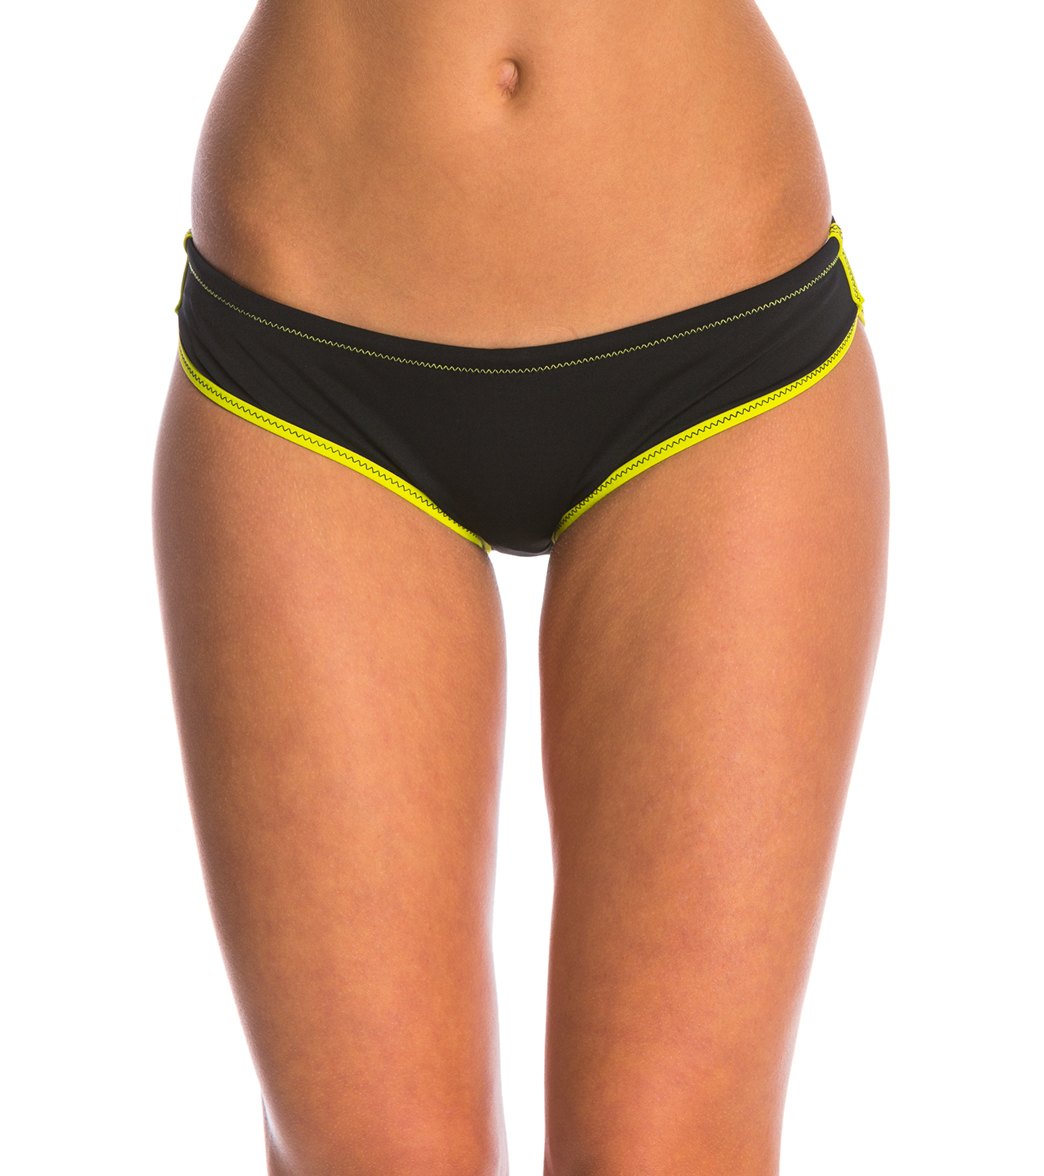 Arena Women's Sports Racer Brief Swimsuit - Black/Soft Green 26 Polyester/Pbt - Swimoutlet.com